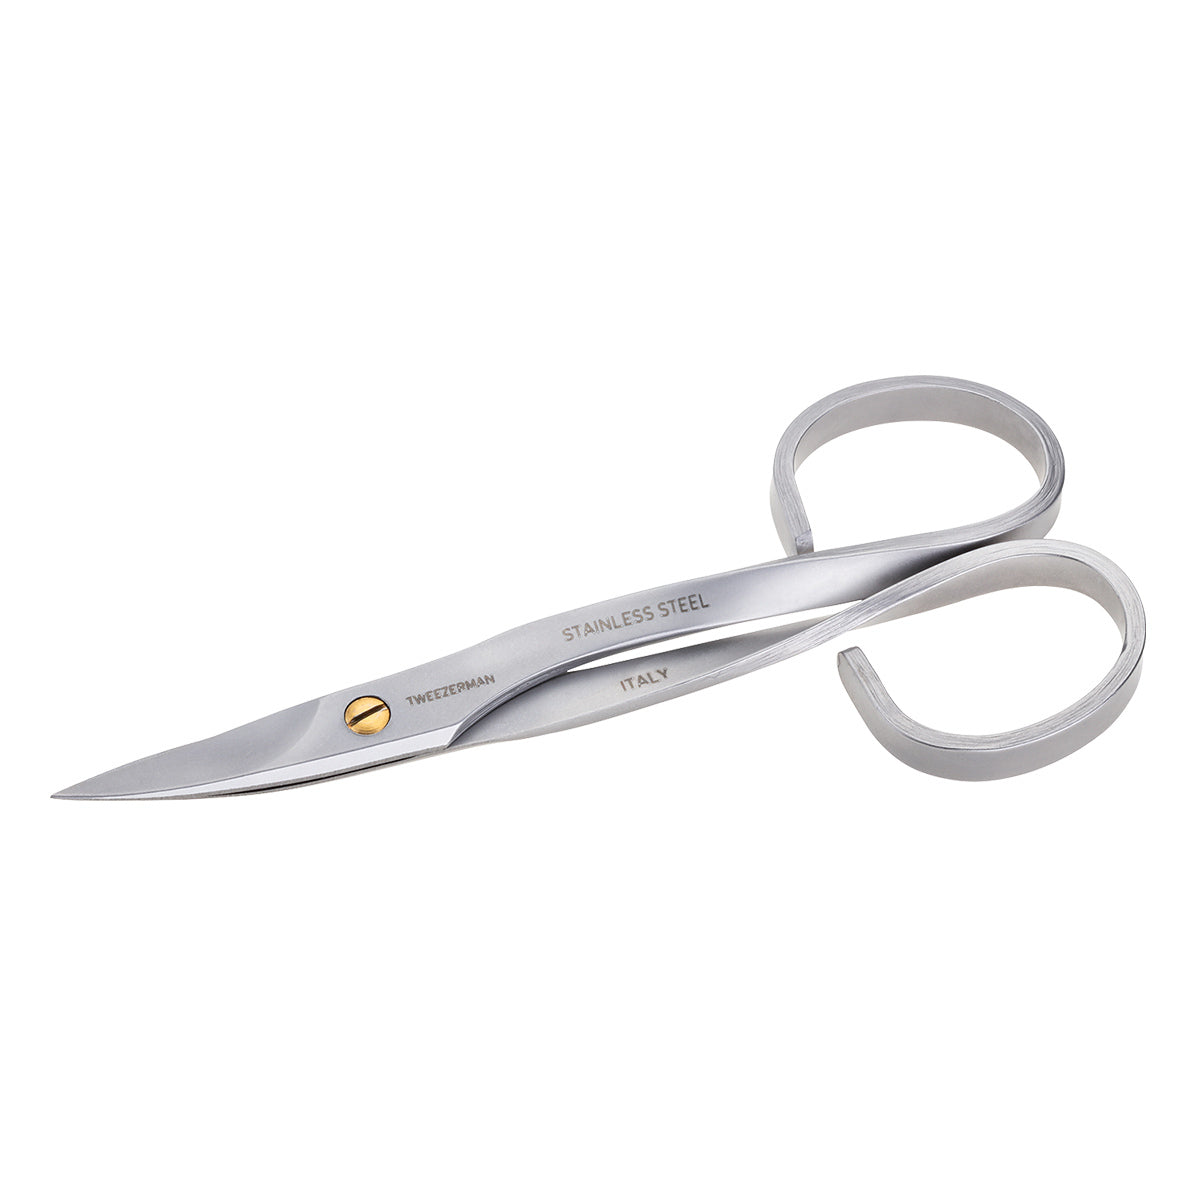 Primary image of Stainless Steel Nail Scissors